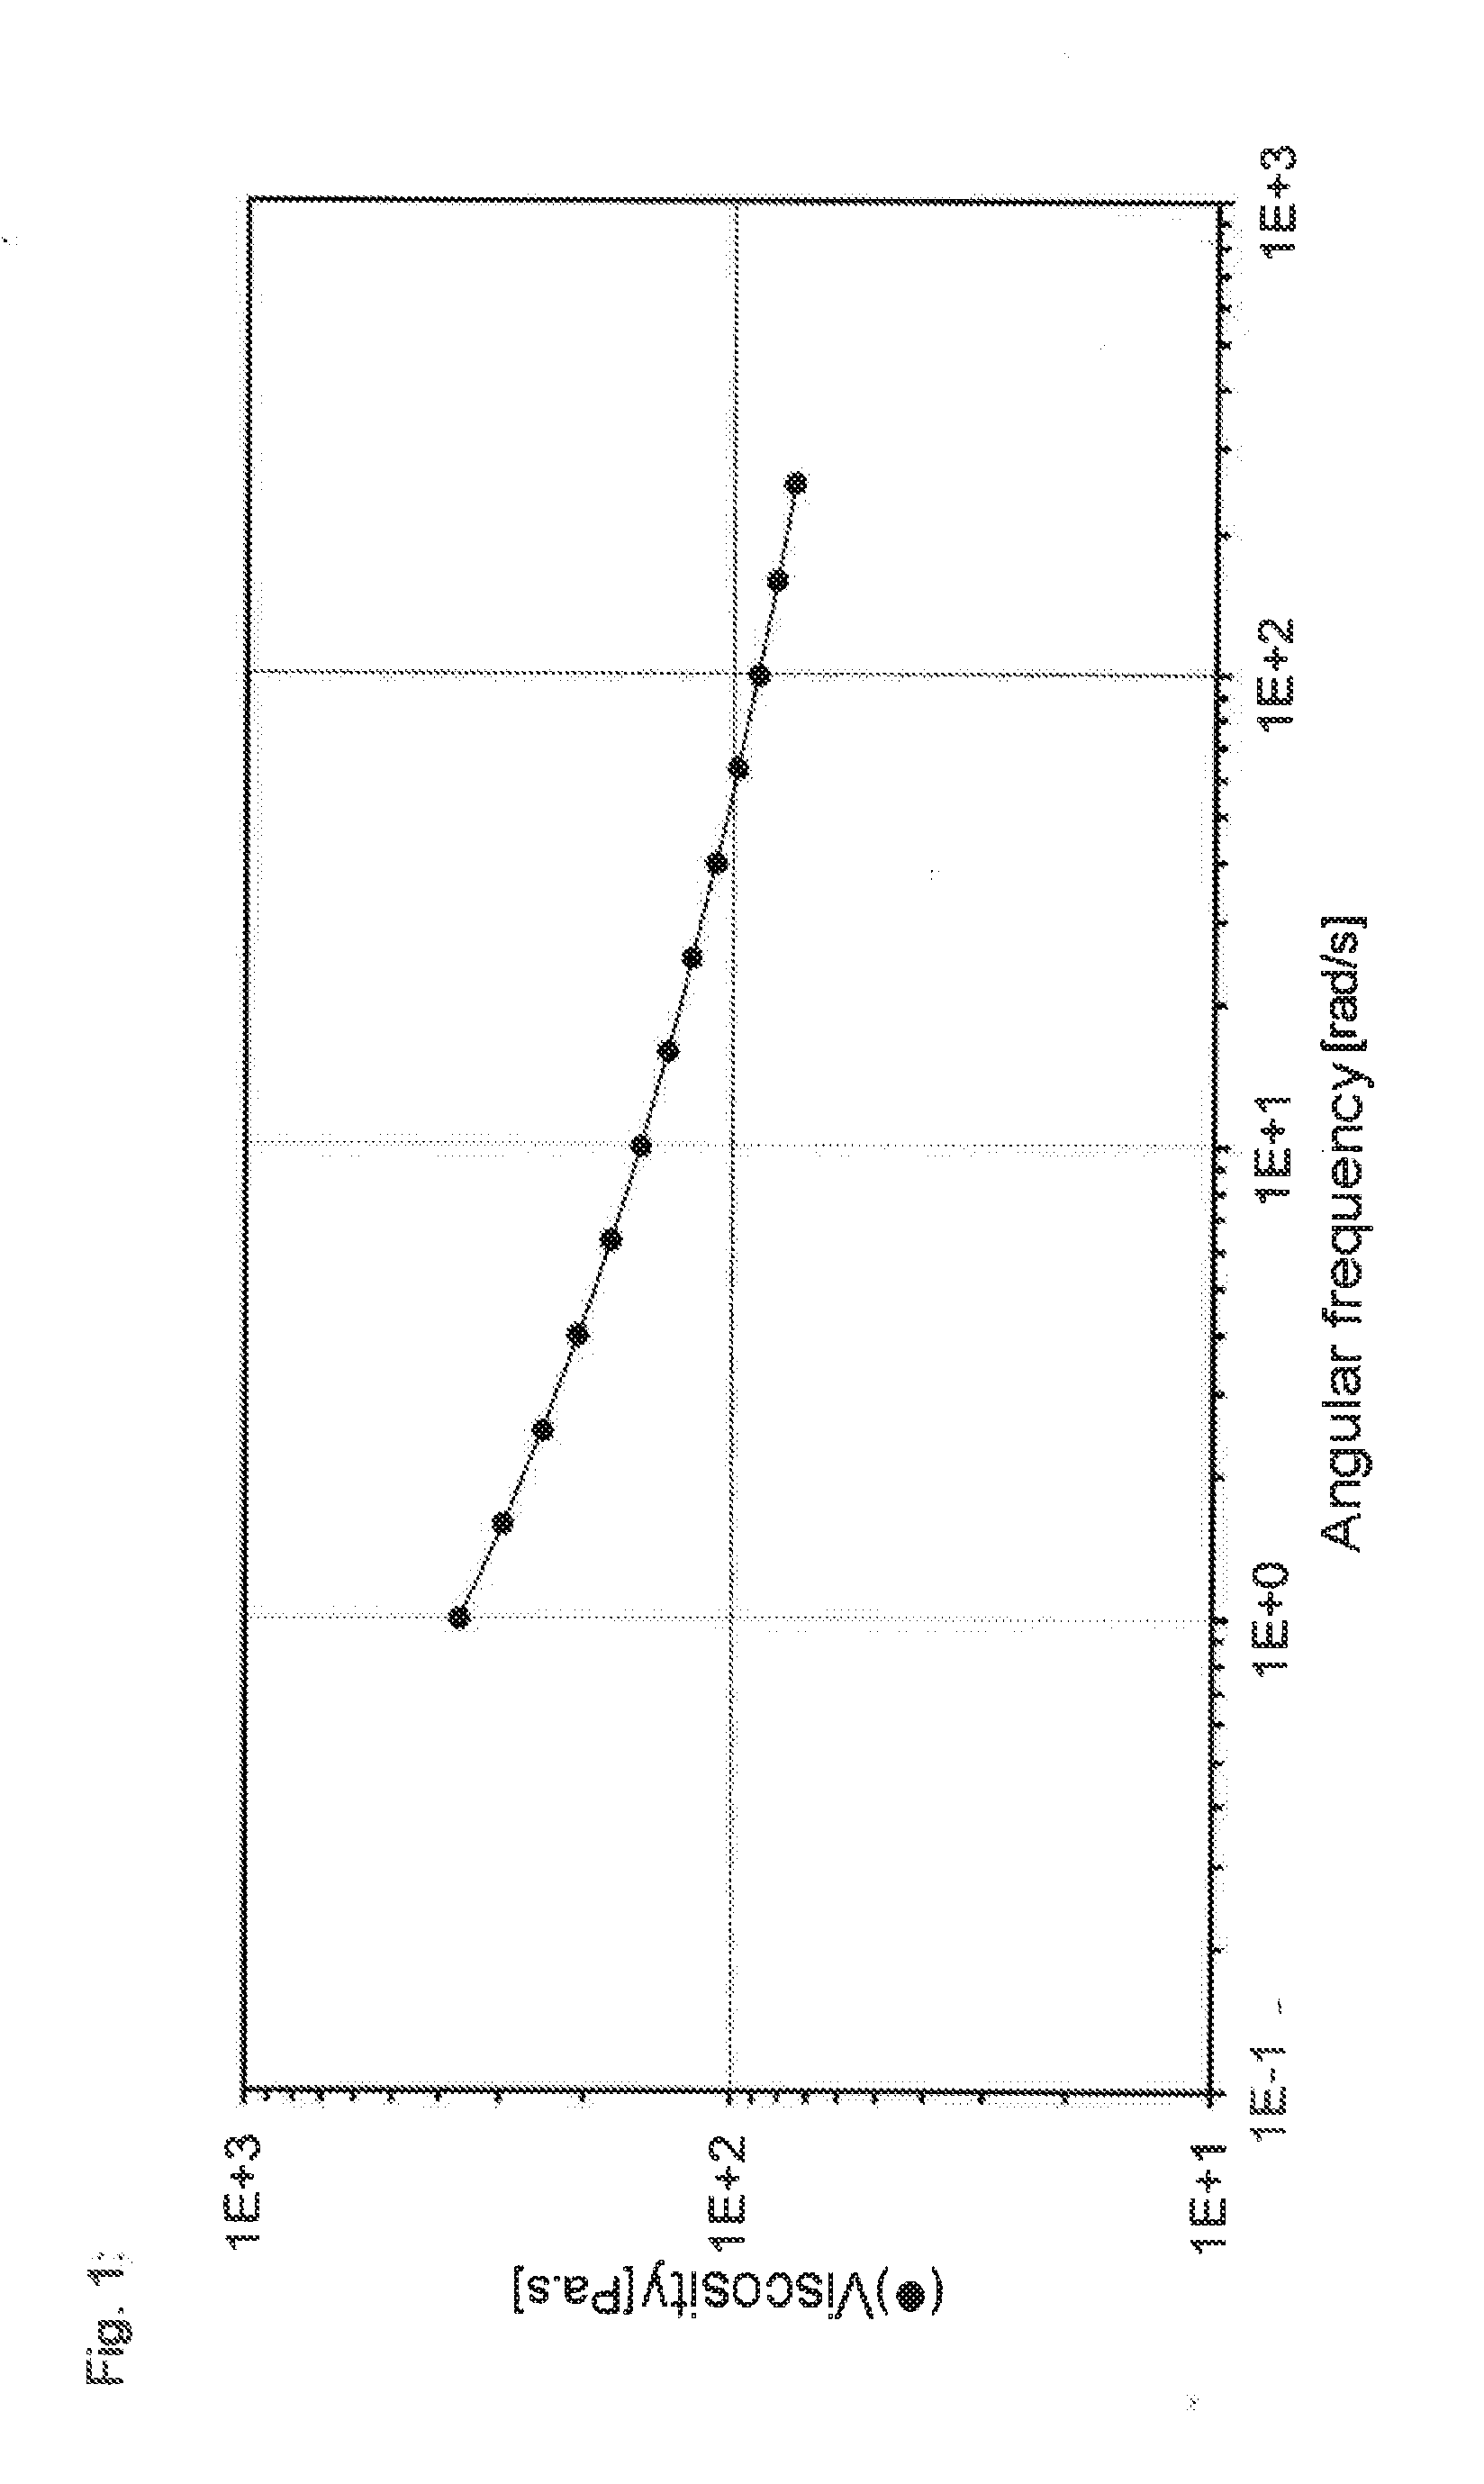 Gel-like polymer composition obtained by polymerising a monomer containing acid groups in the presence of a polyether compound